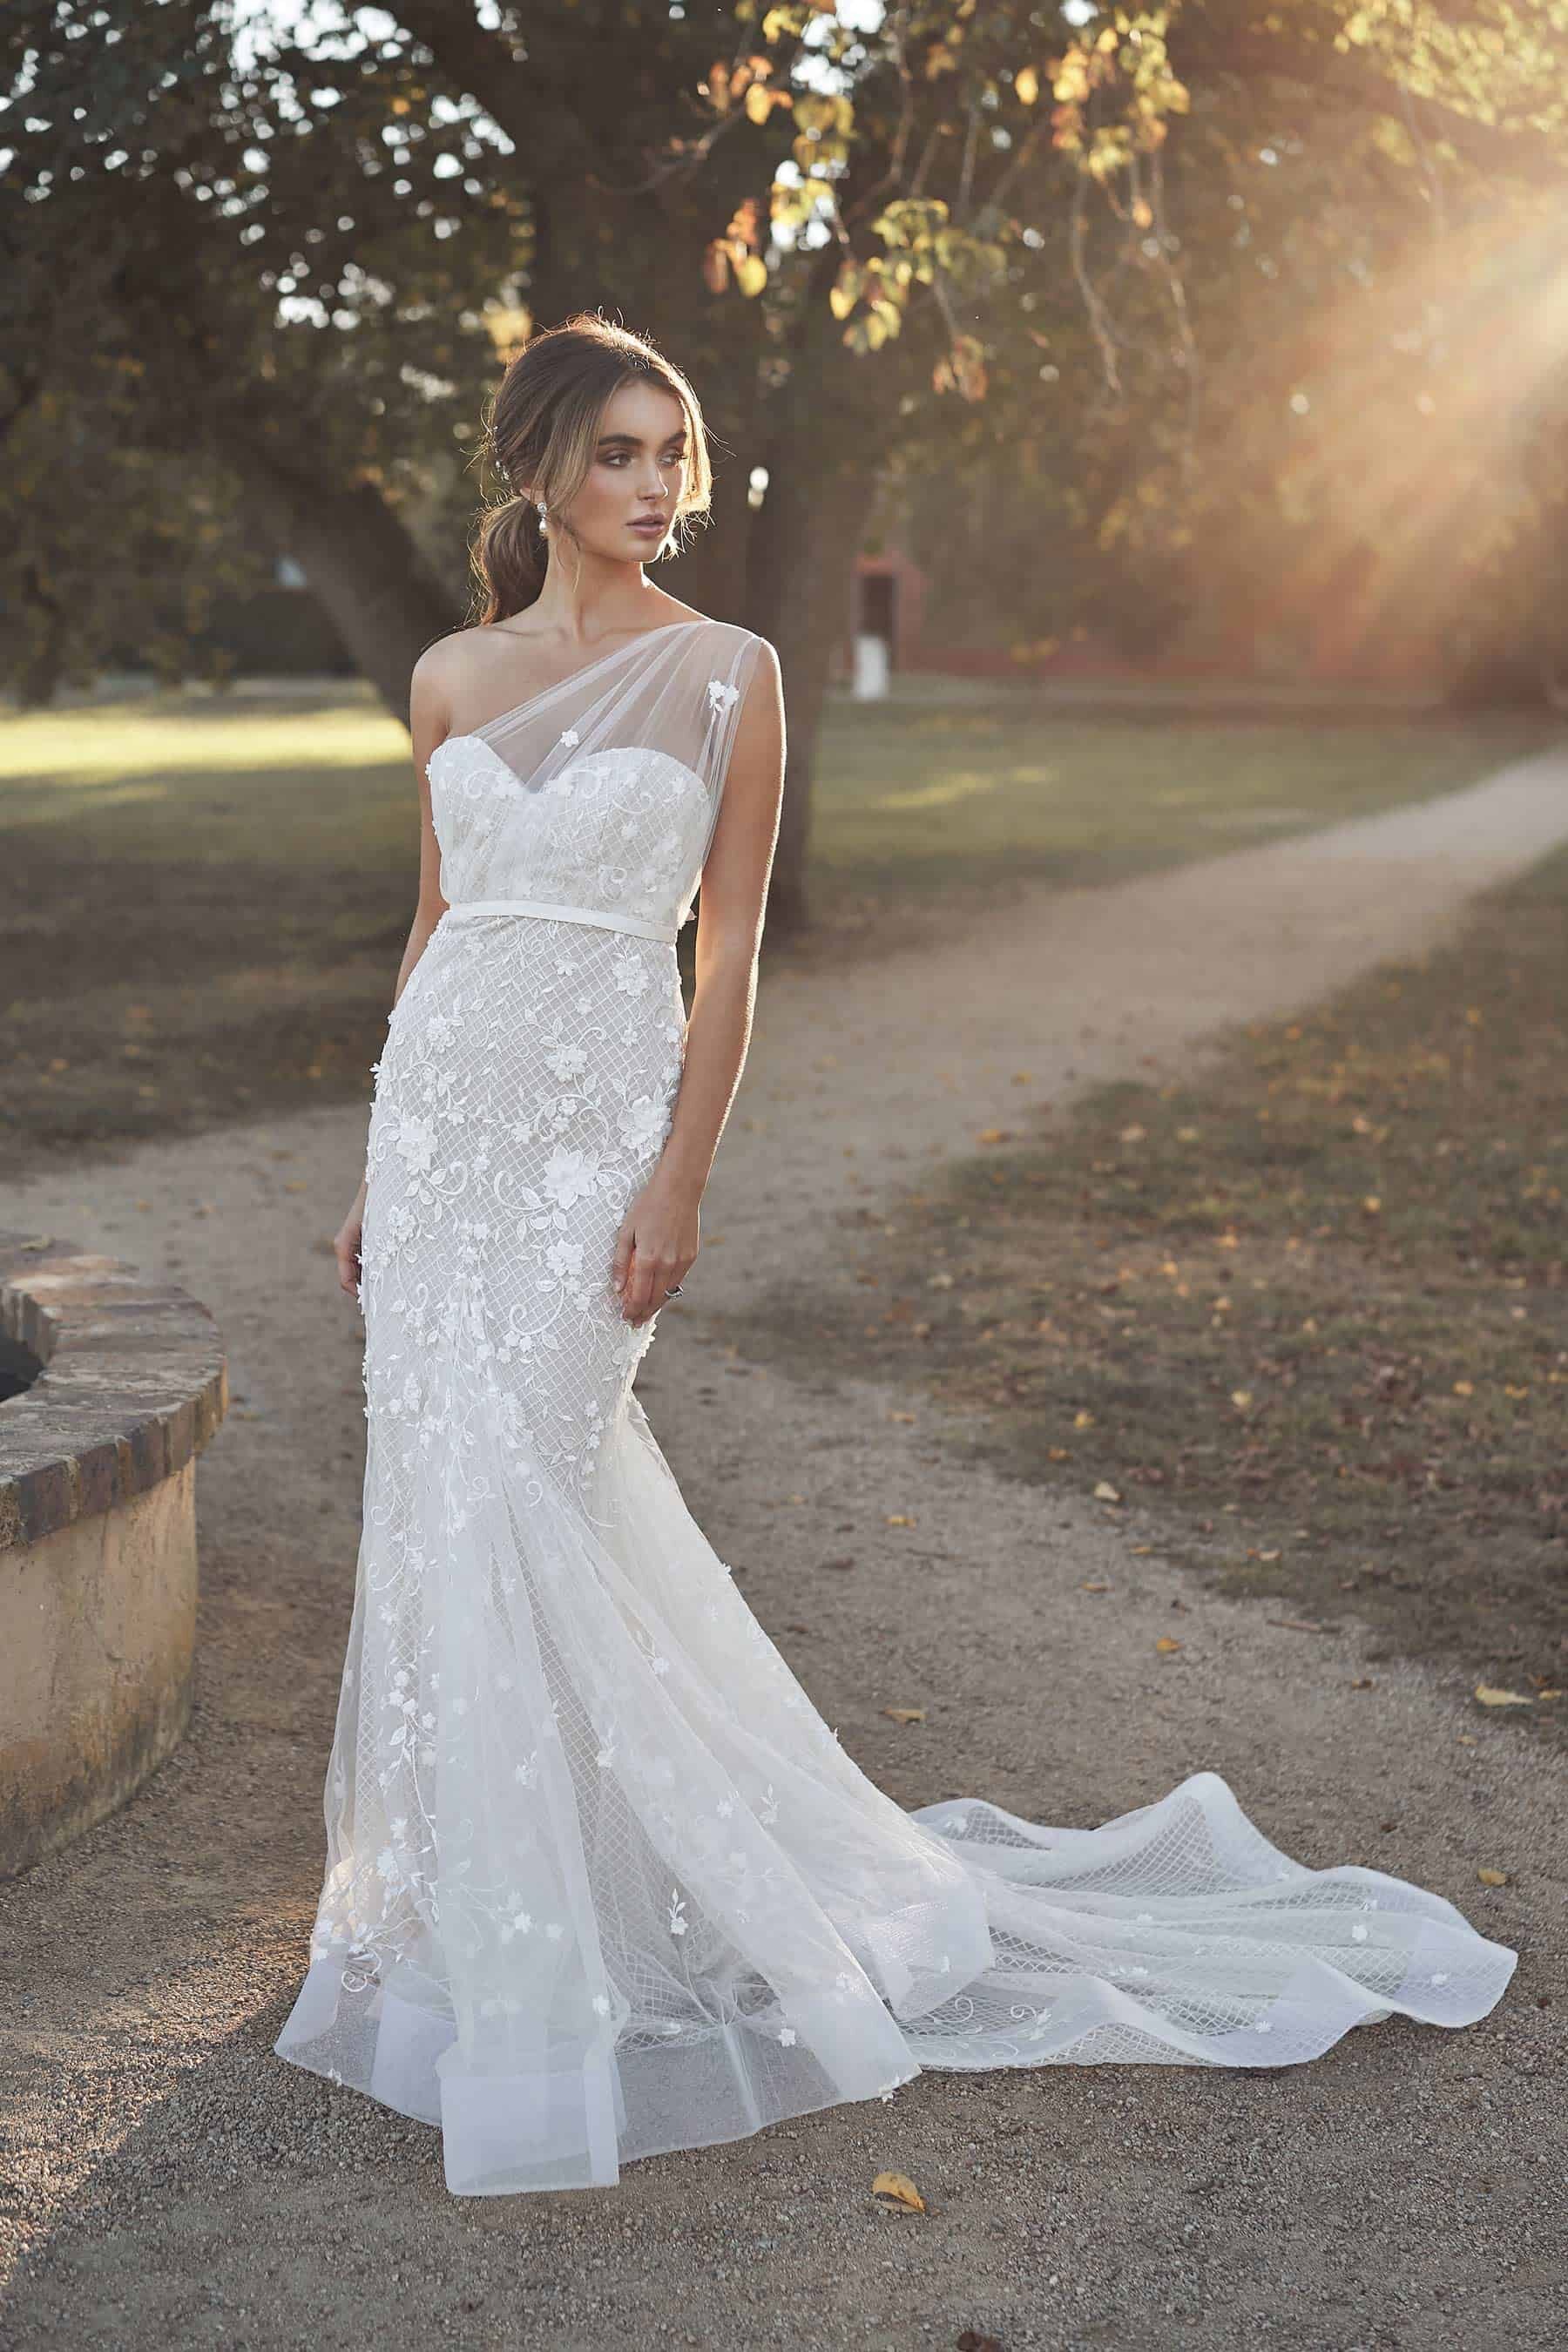 ‘Lumière’ – The Ethereal New Bridal Collection by Anna Campbell